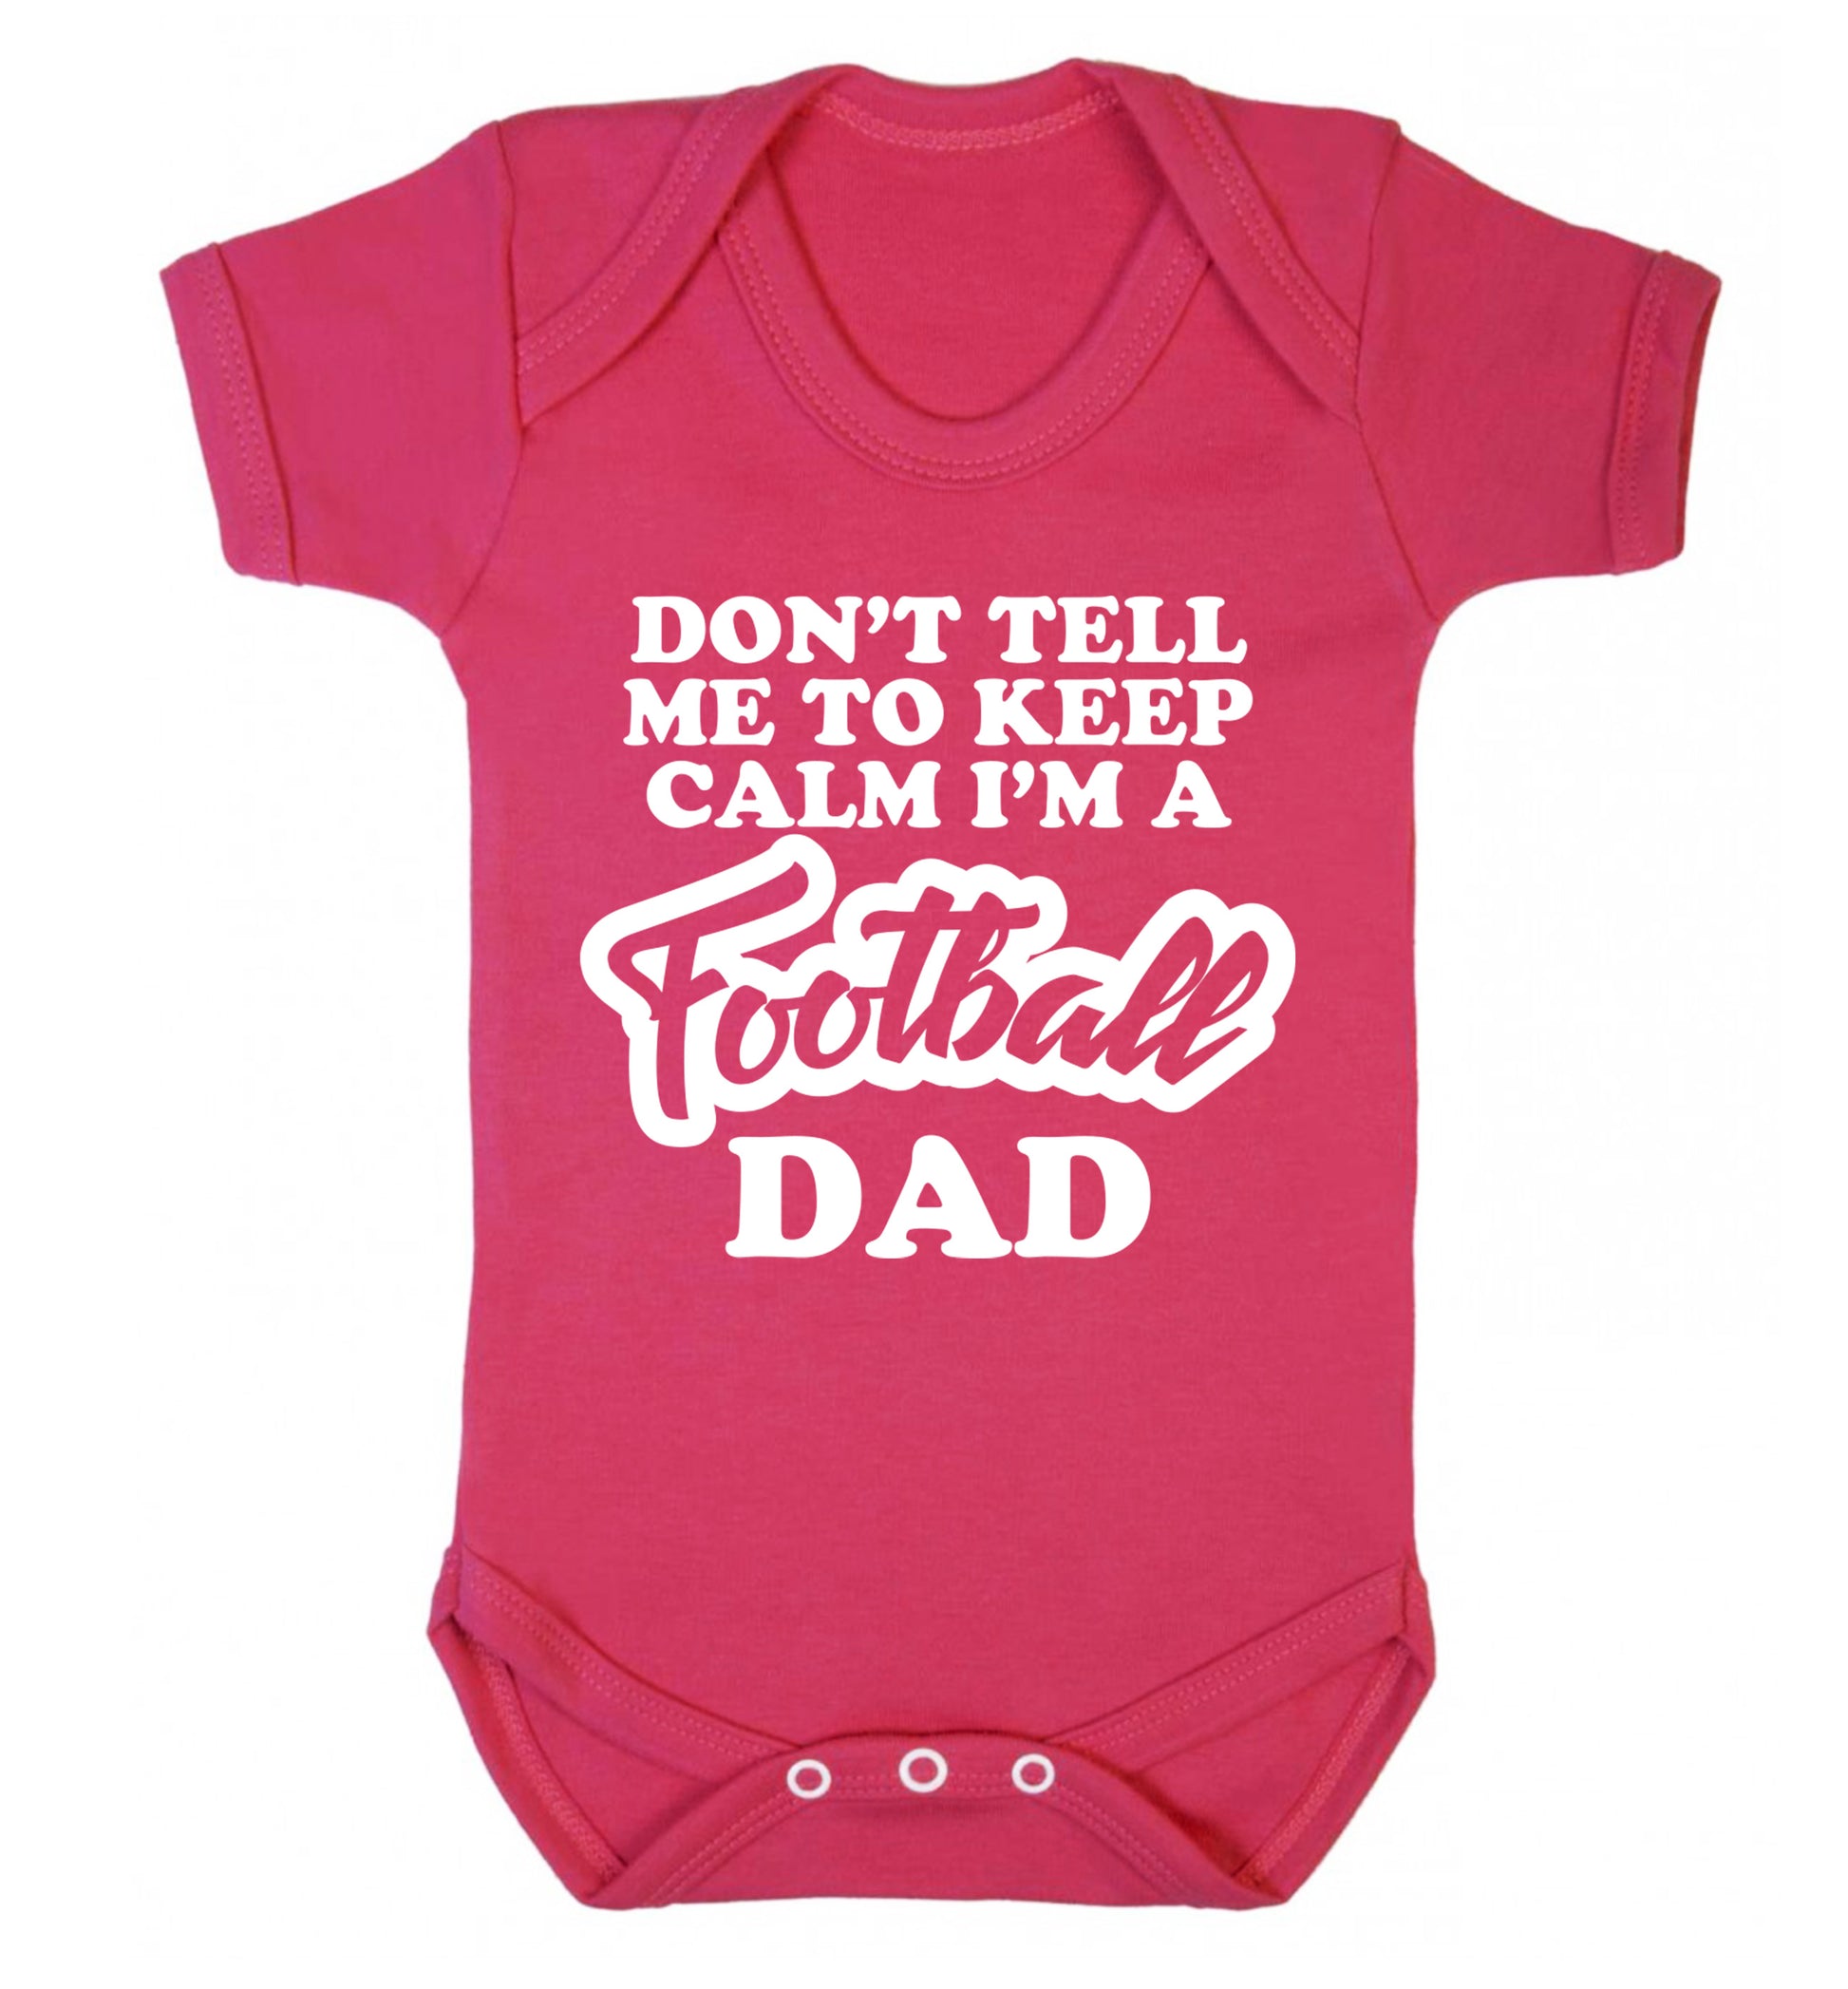 Don't tell me to keep calm I'm a football dad Baby Vest dark pink 18-24 months